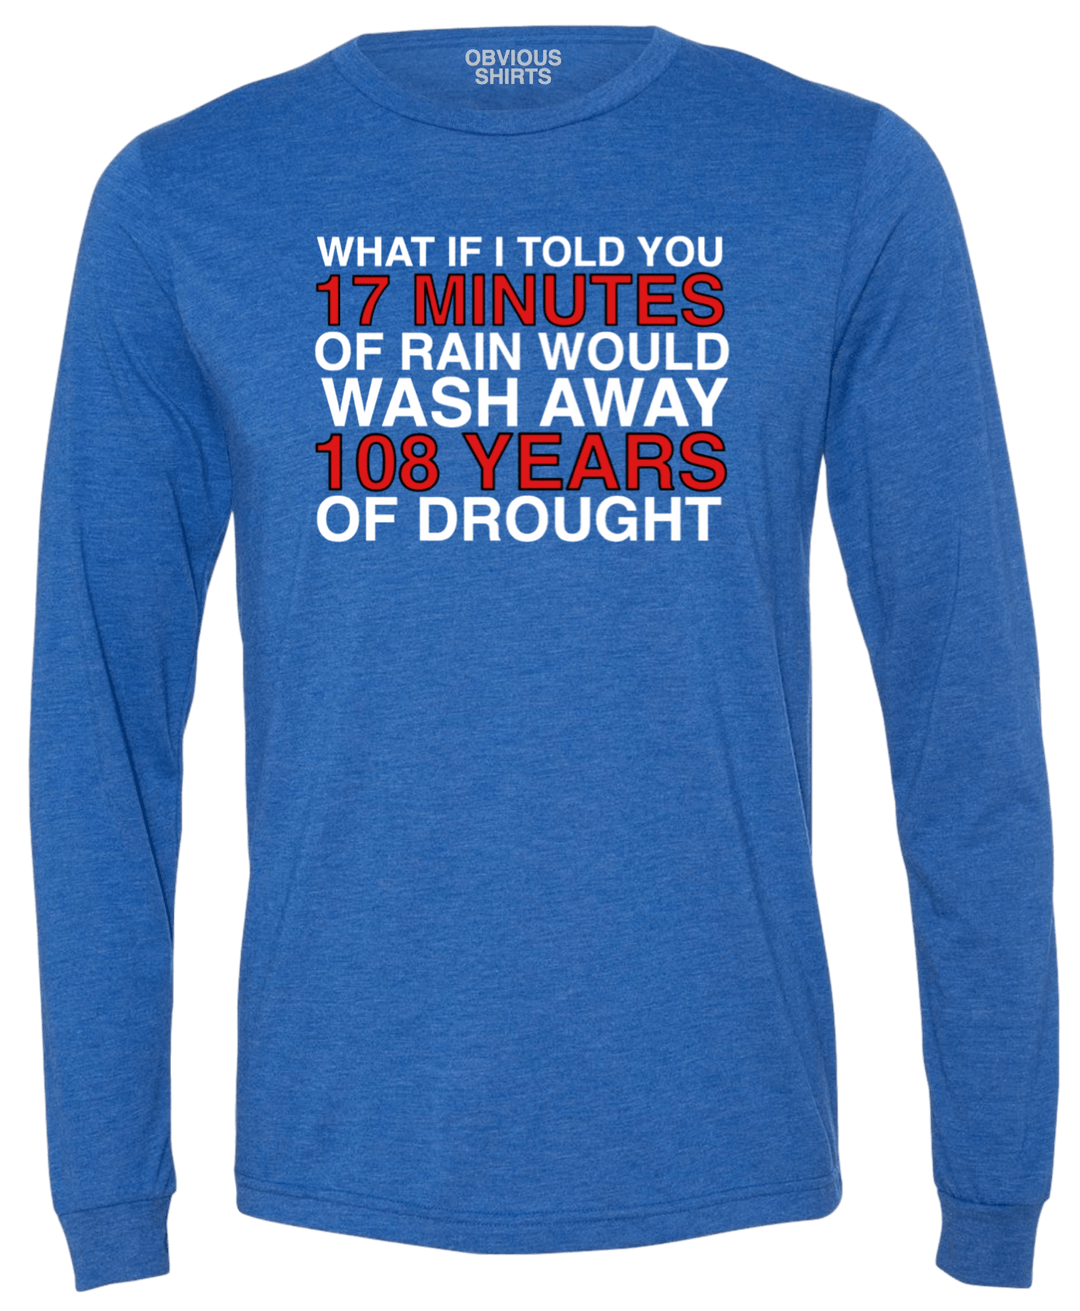 WHAT IF I TOLD YOU... (LONG SLEEVE) - OBVIOUS SHIRTS.